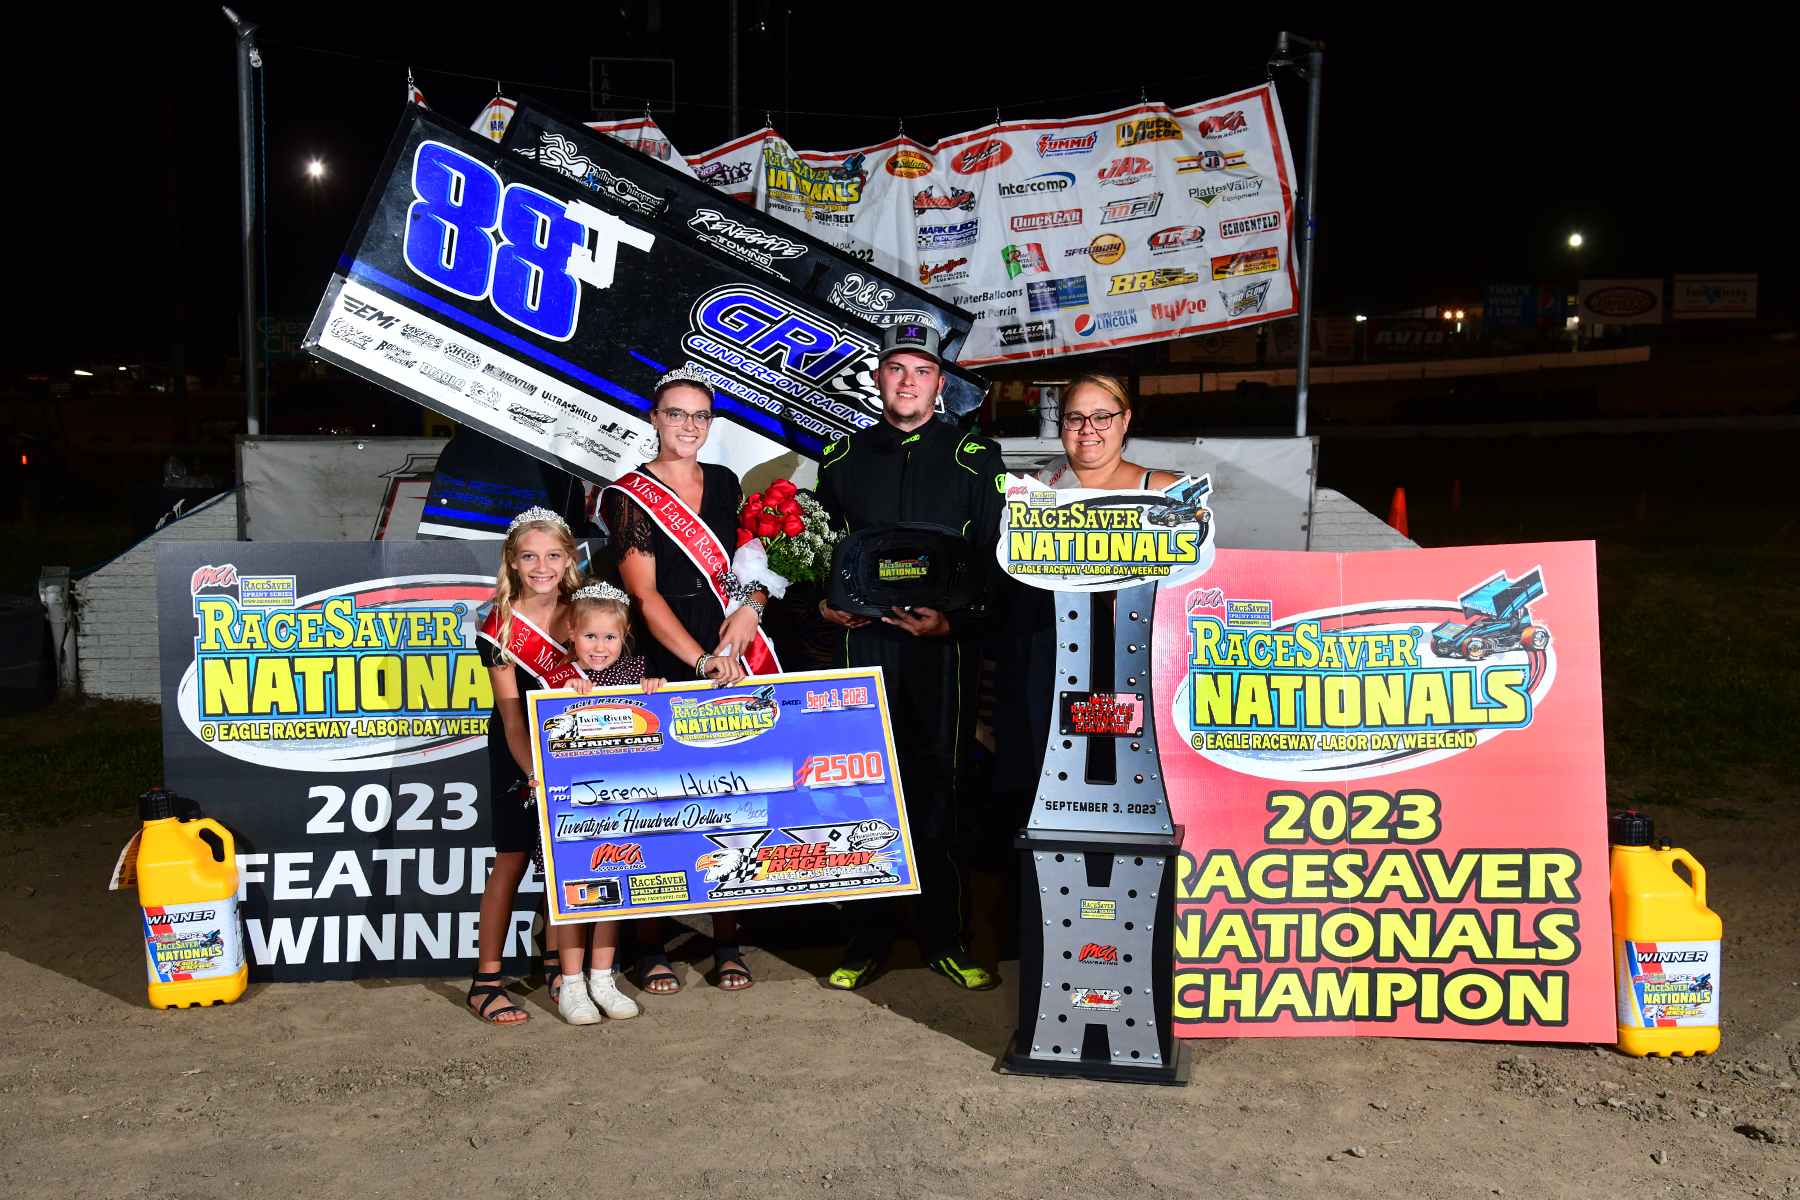 JEREMY HUISH IS THE 2023 IMCA RACESAVER NATIONALS CHAMPION!